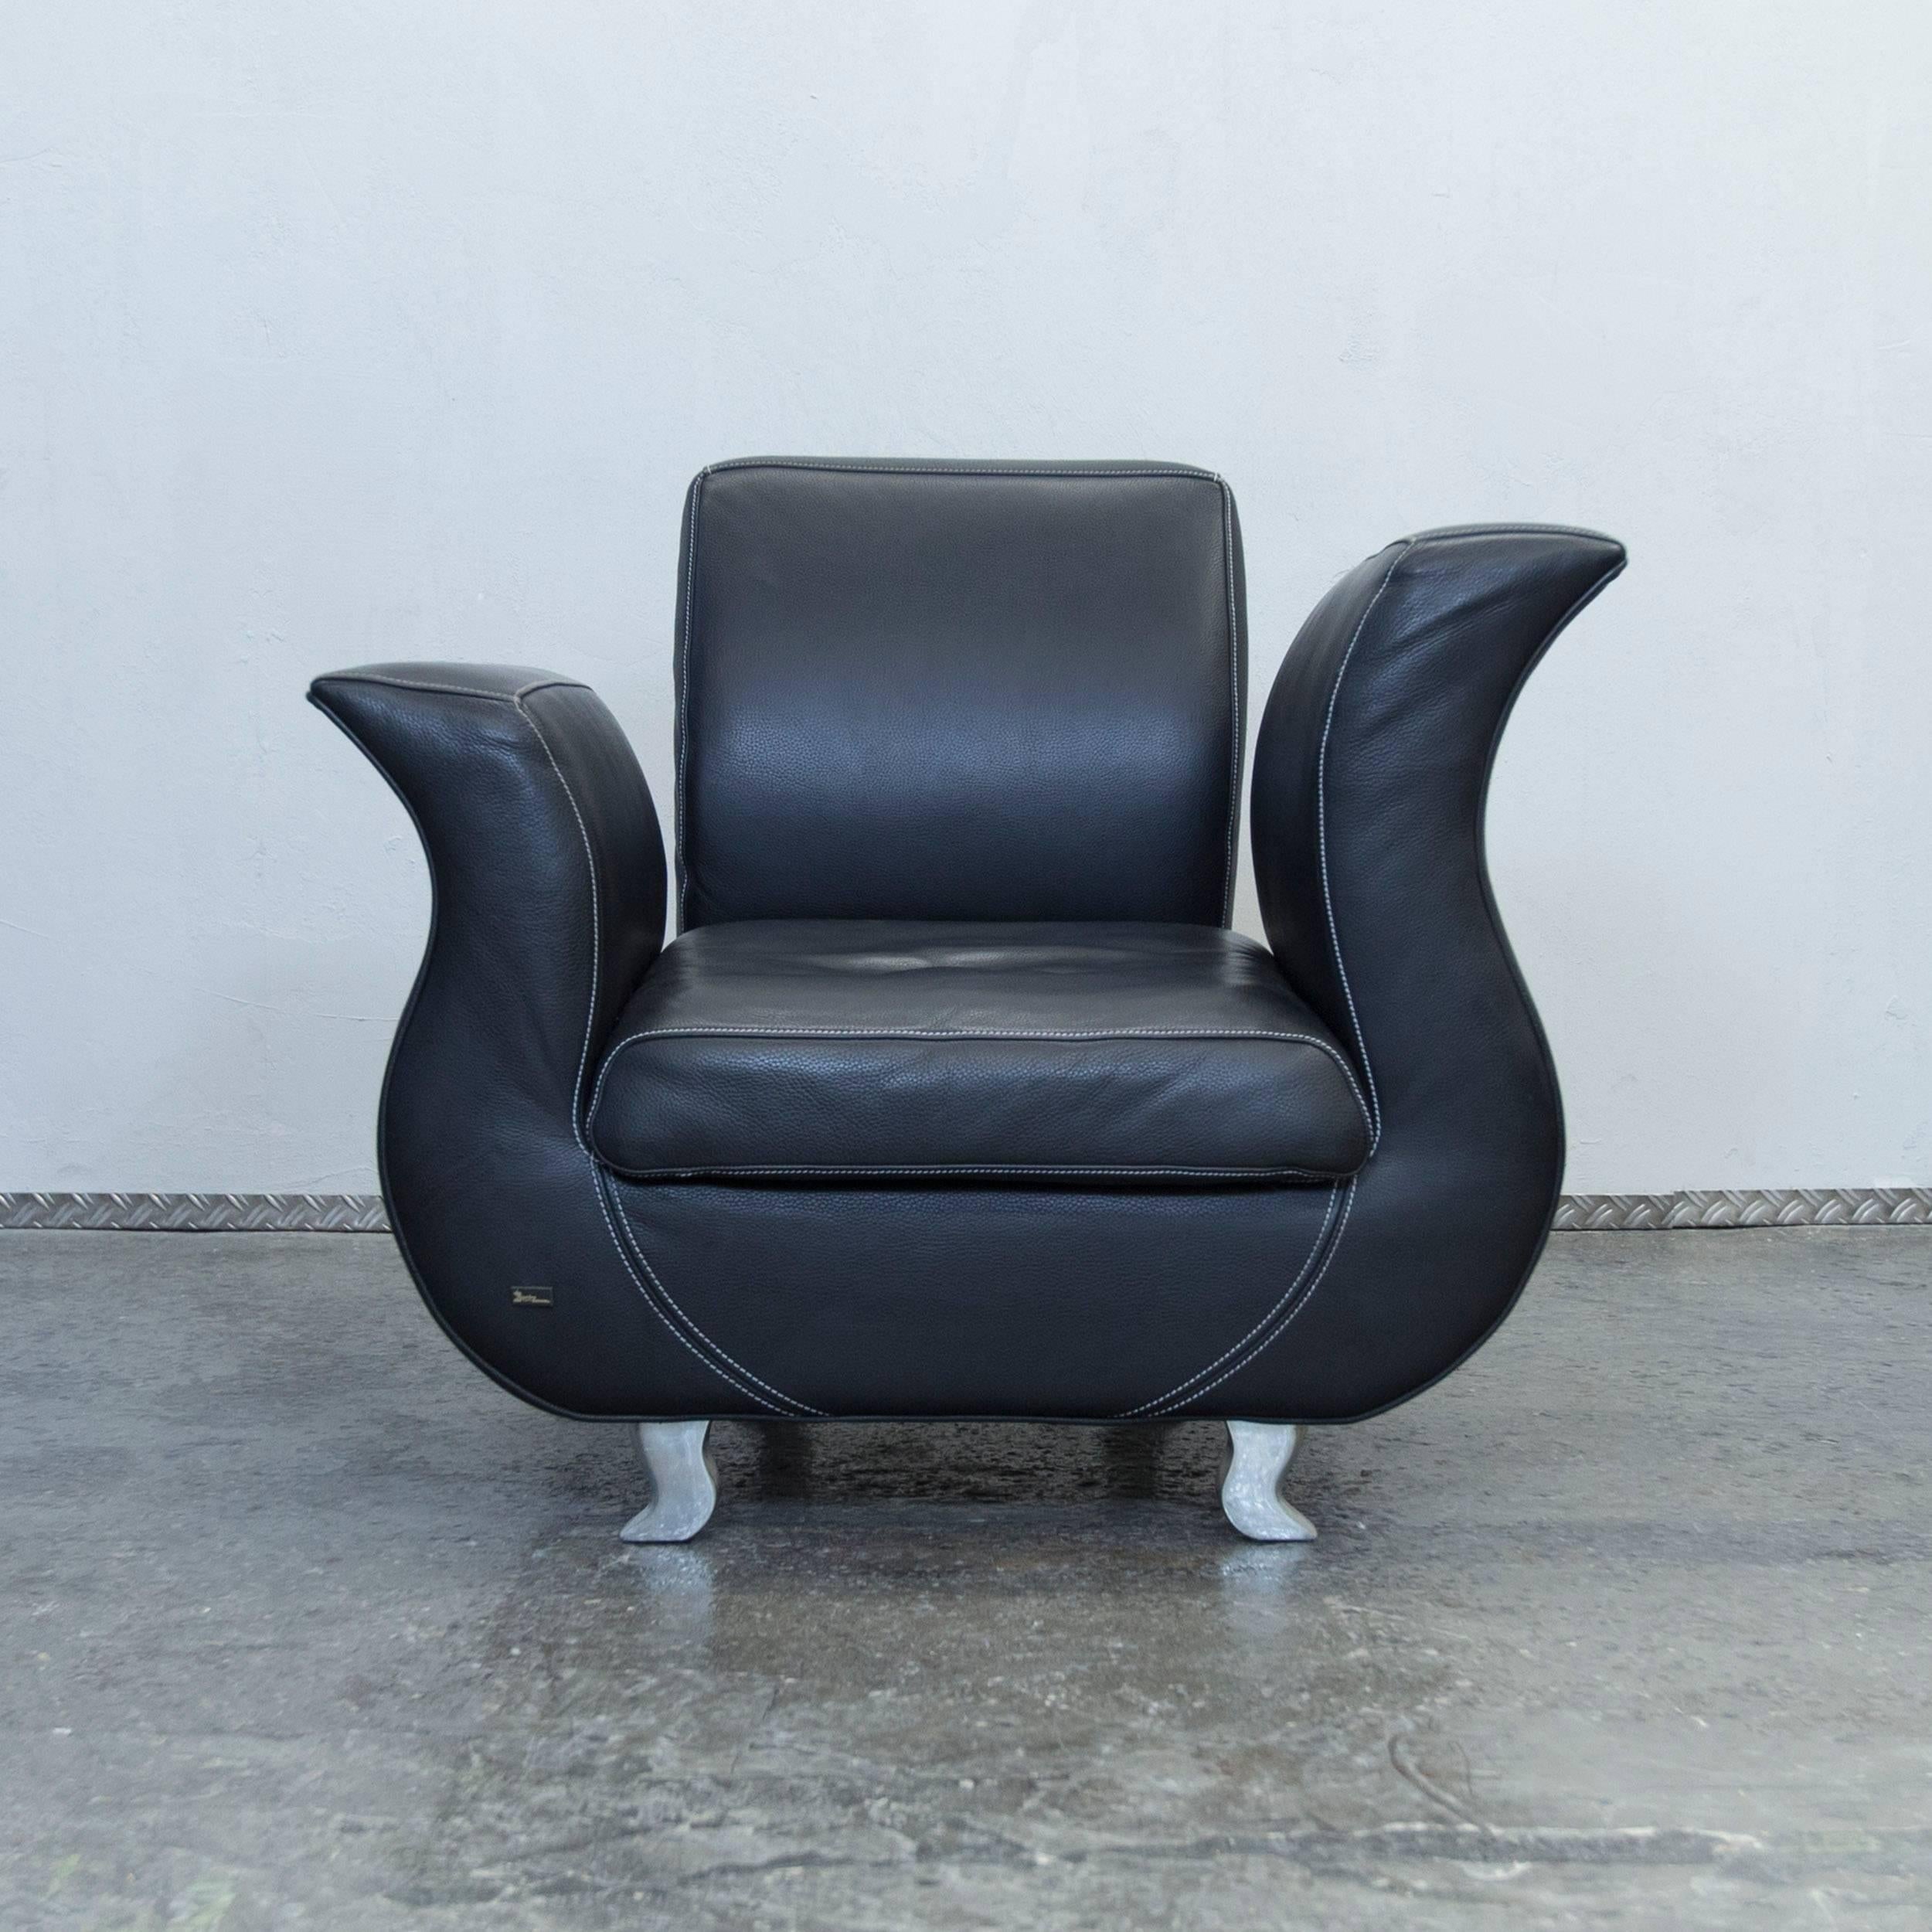 Black colored original Bretz Moon designer leather armchair in a minimalistic and modern design, made for pure comfort and elegance.